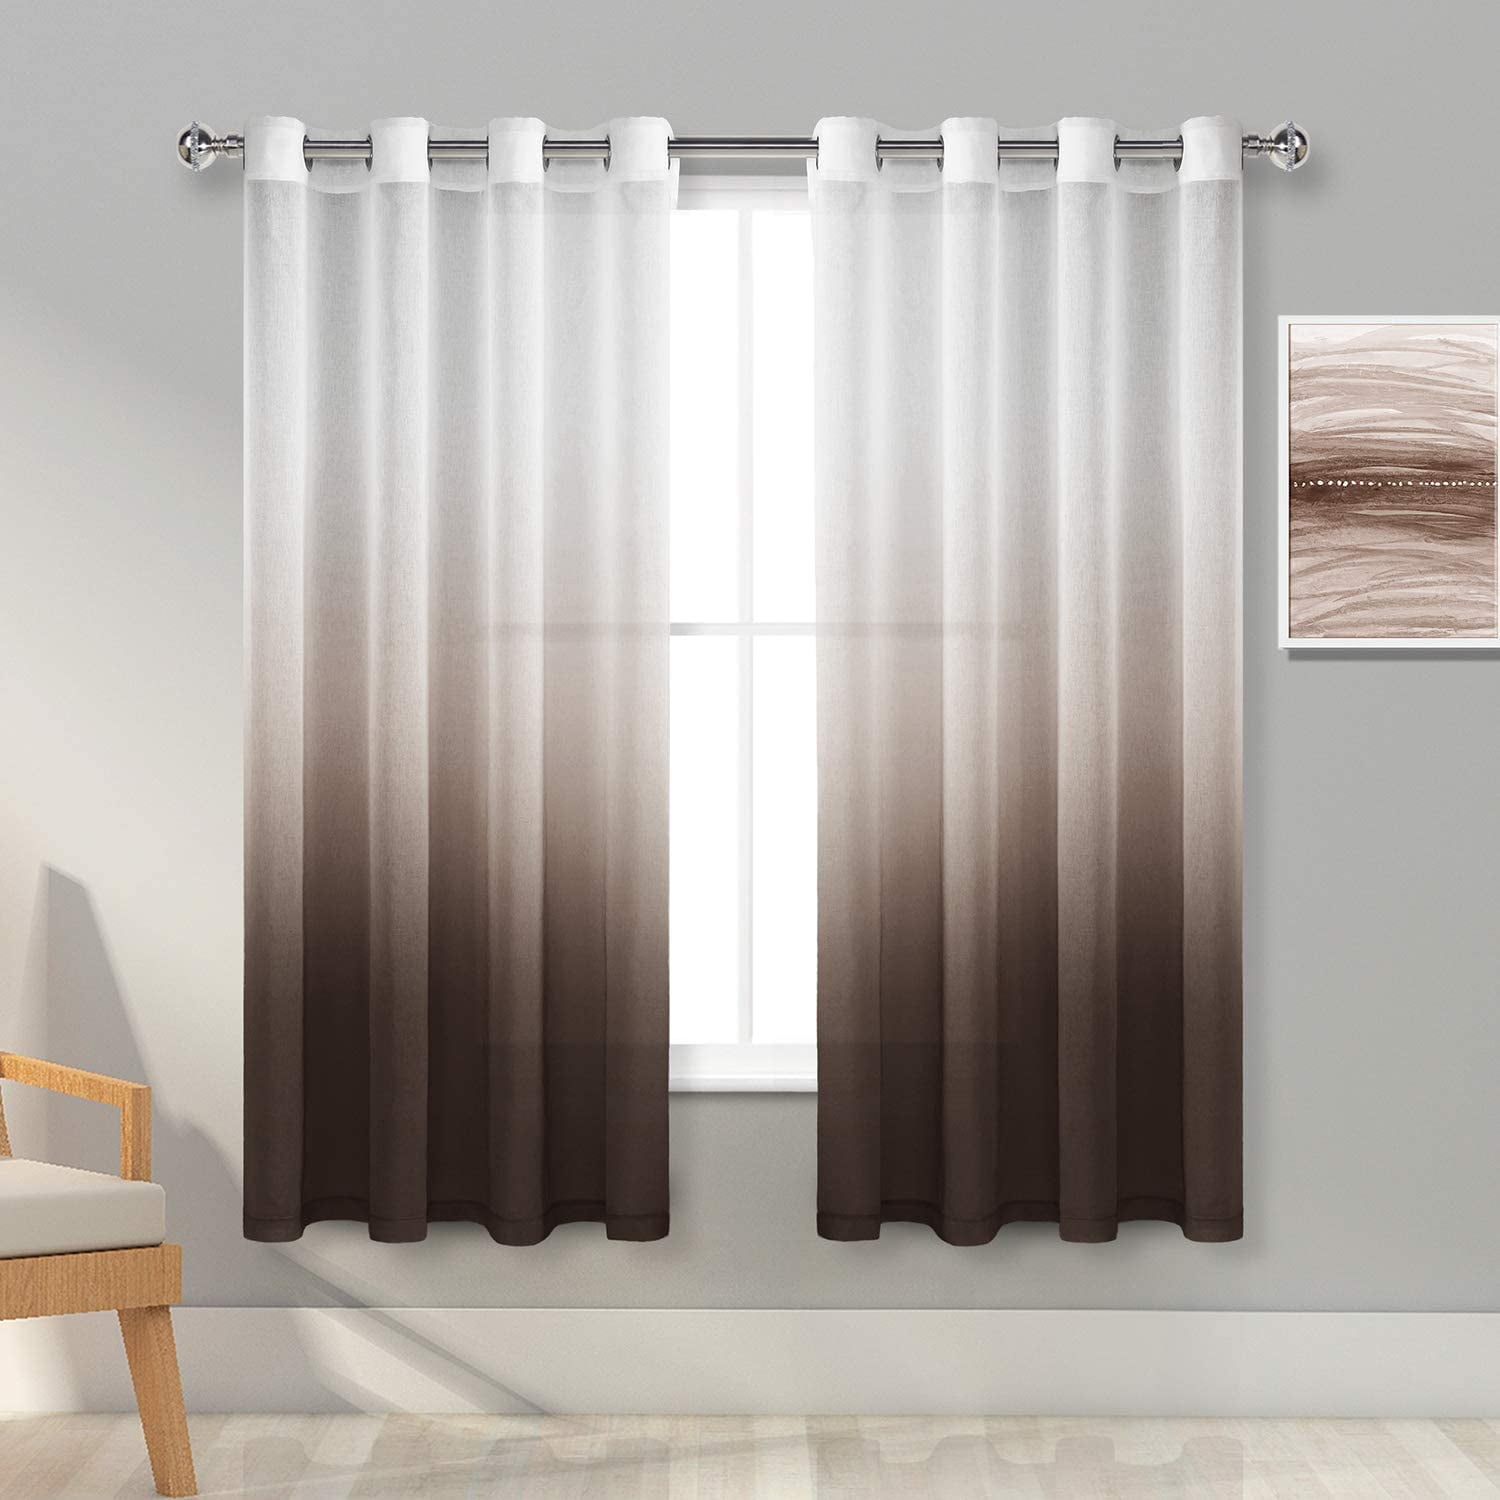 Light Brown 52 x 84 Inches Long DWCN Ombre Sheer Curtains Set of 2 Panels Faux Linen Rod Pocket Semi Voile Window Curtains for Bedroom and Living Room